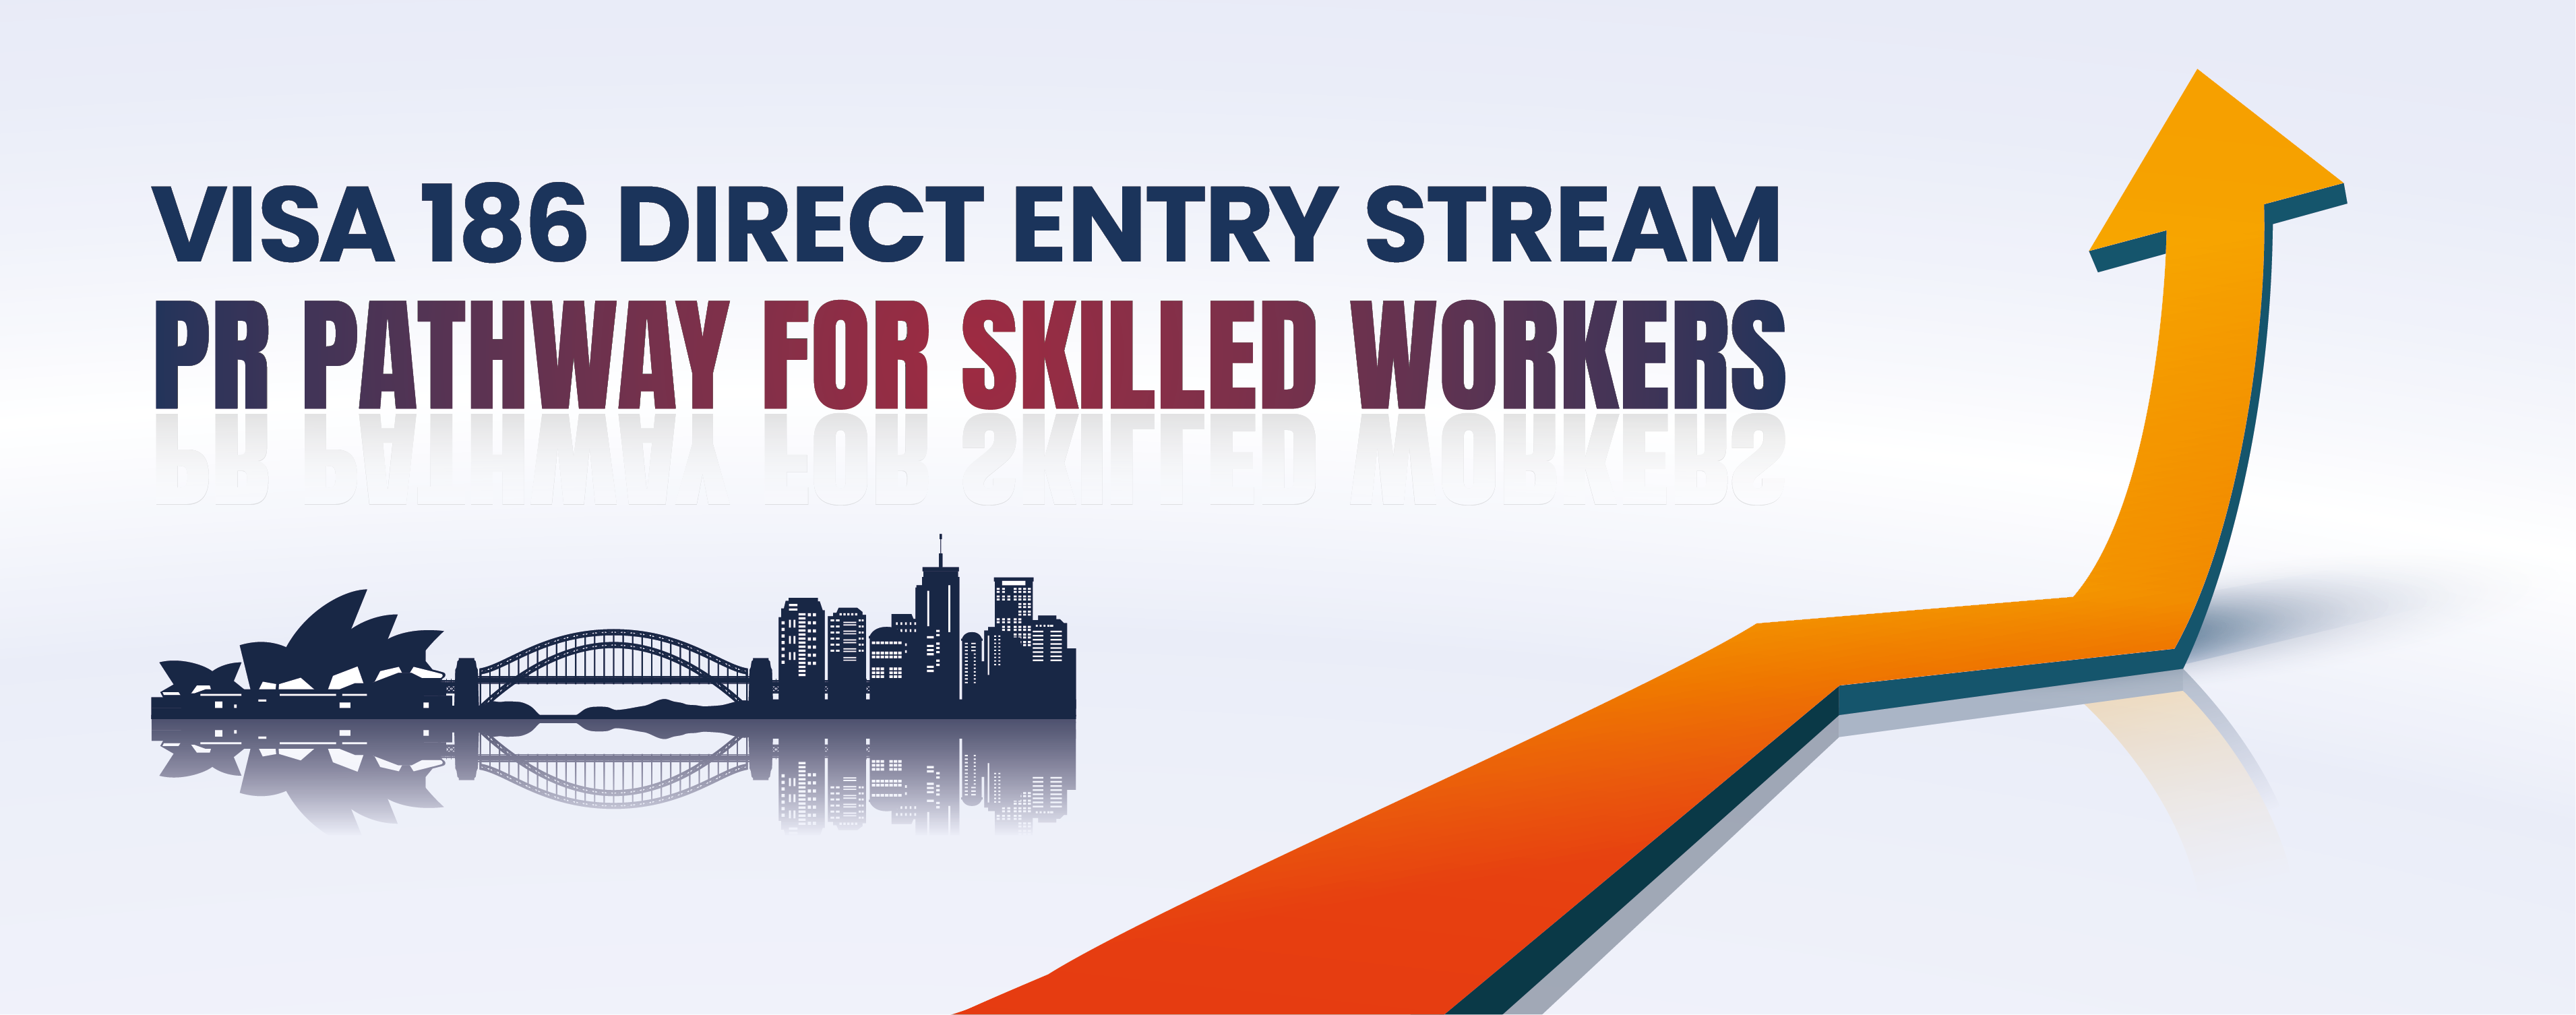 Visa 186 Direct Entry Stream: PR Pathway for Skilled Workers